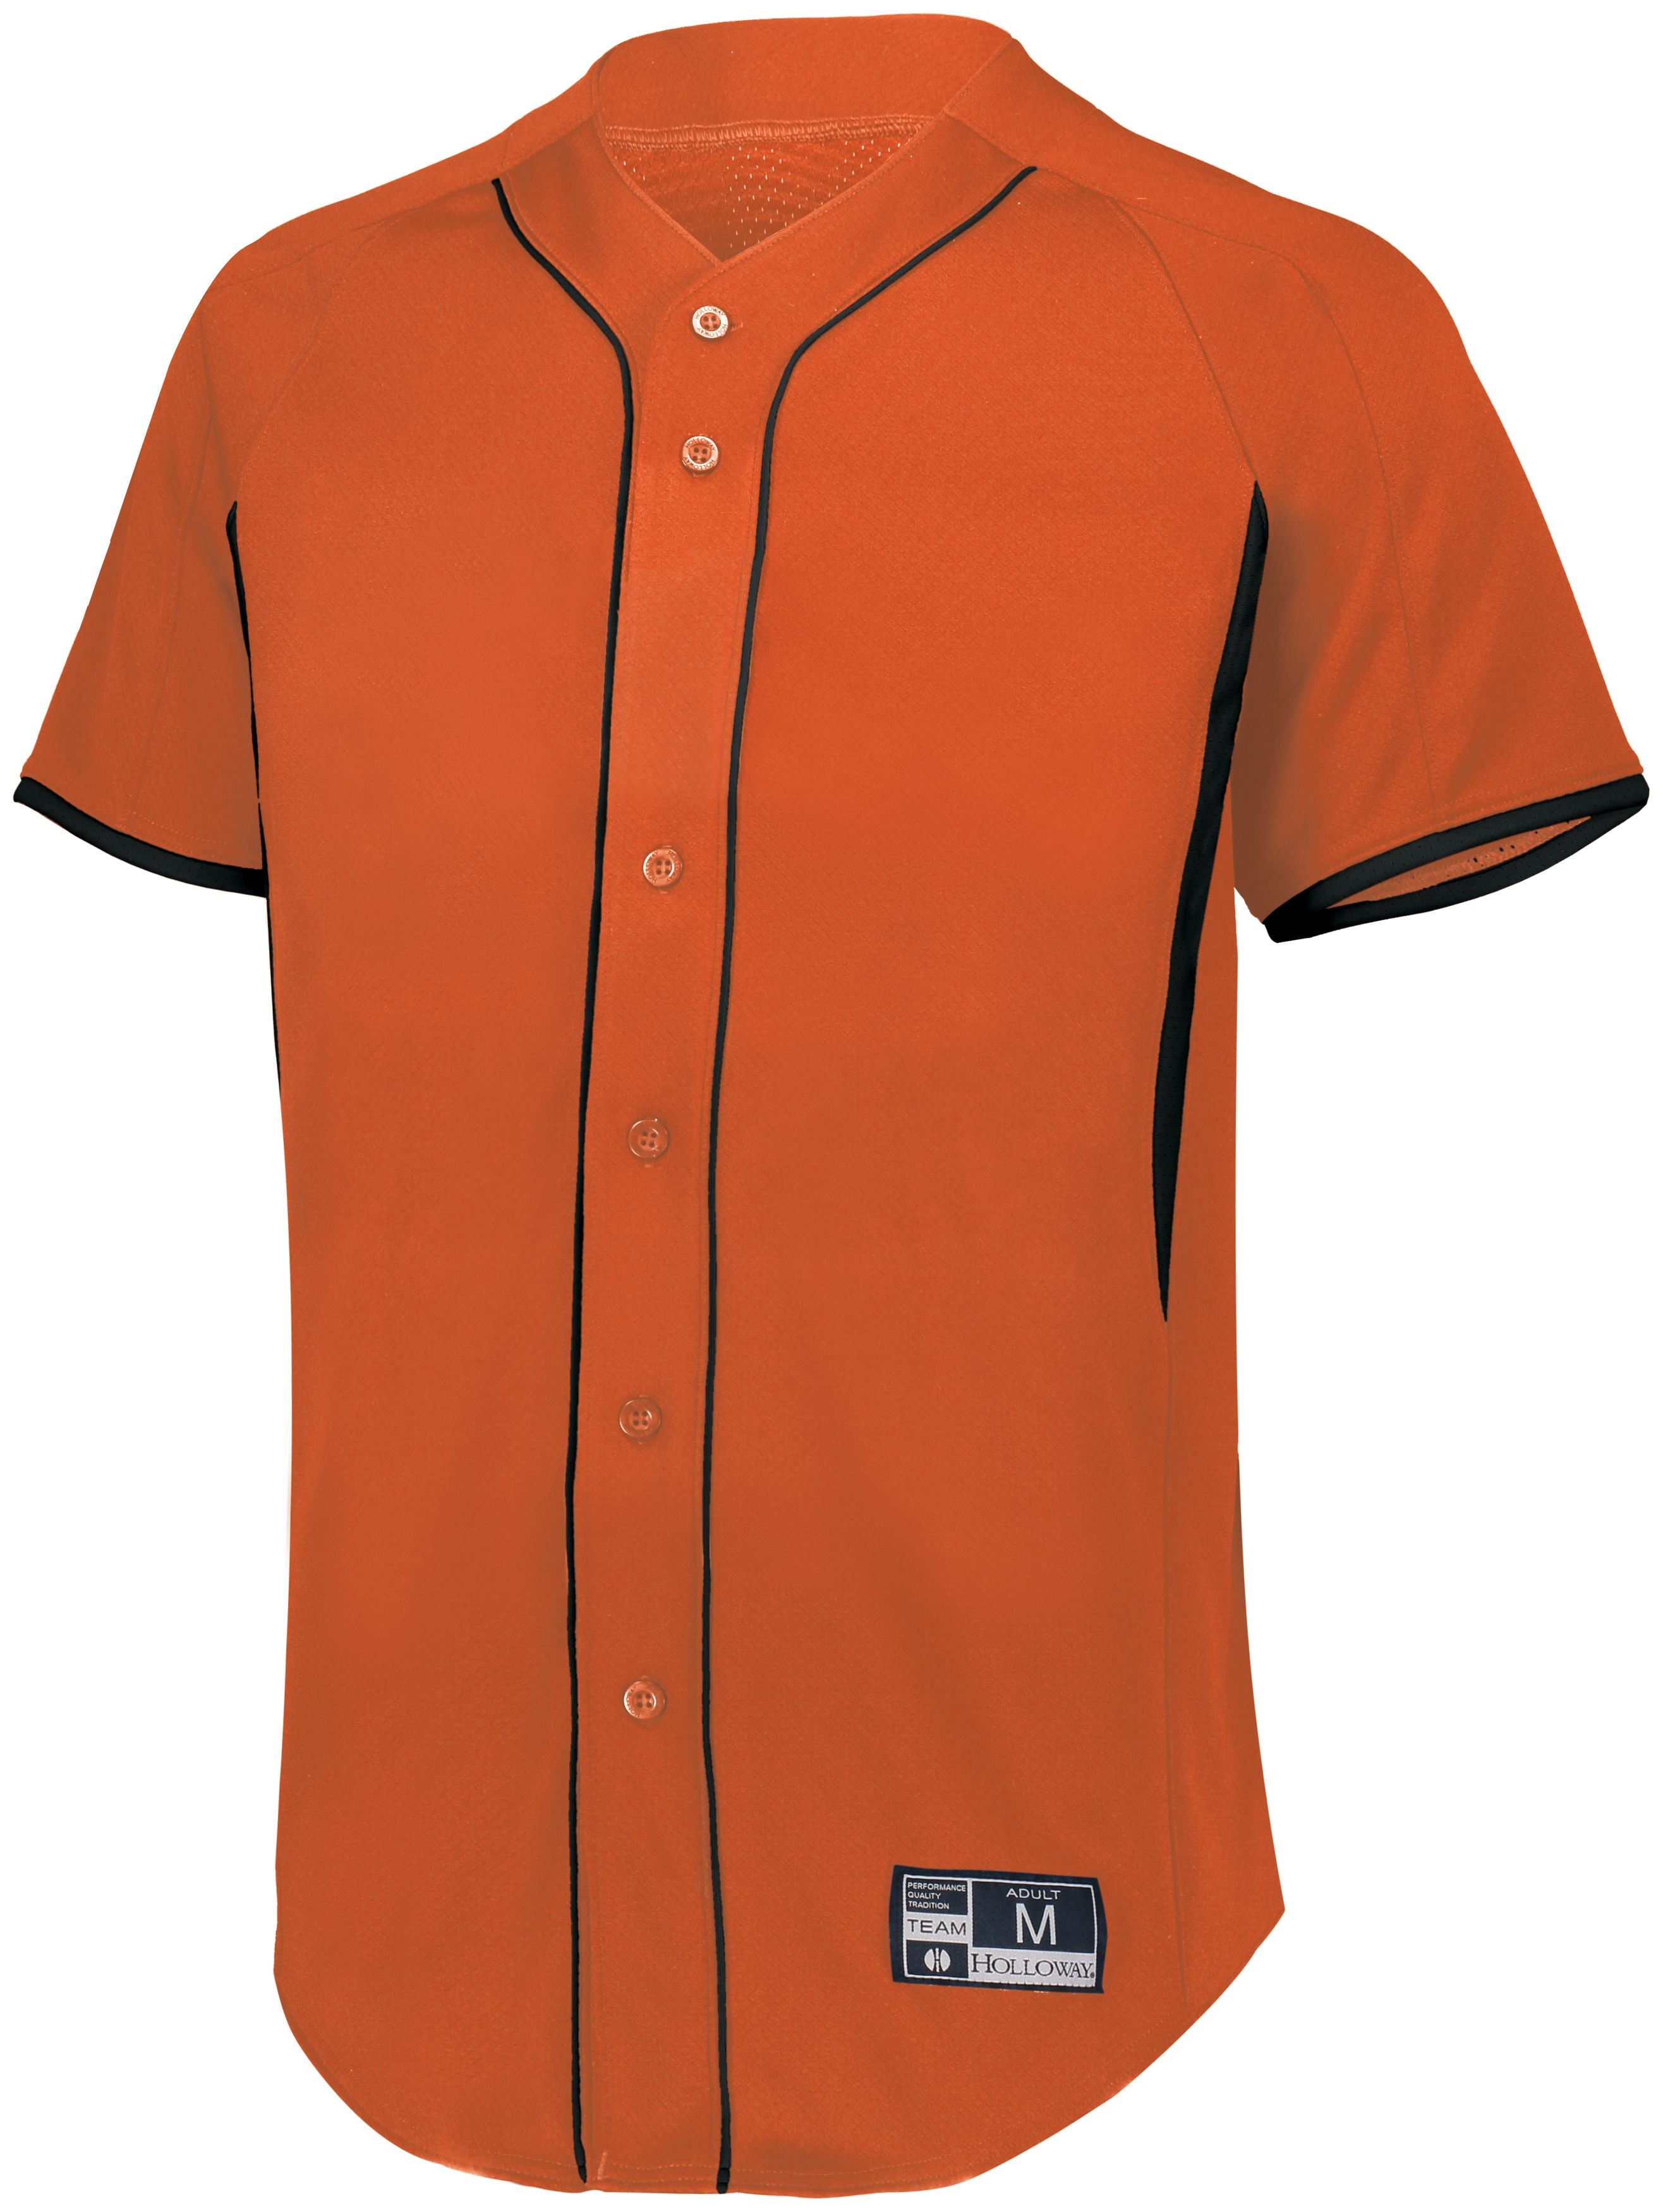 Holloway Game7 Full-Button Baseball Jersey in Orange/Black  -Part of the Adult, Adult-Jersey, Baseball, Holloway, Shirts, All-Sports, All-Sports-1 product lines at KanaleyCreations.com